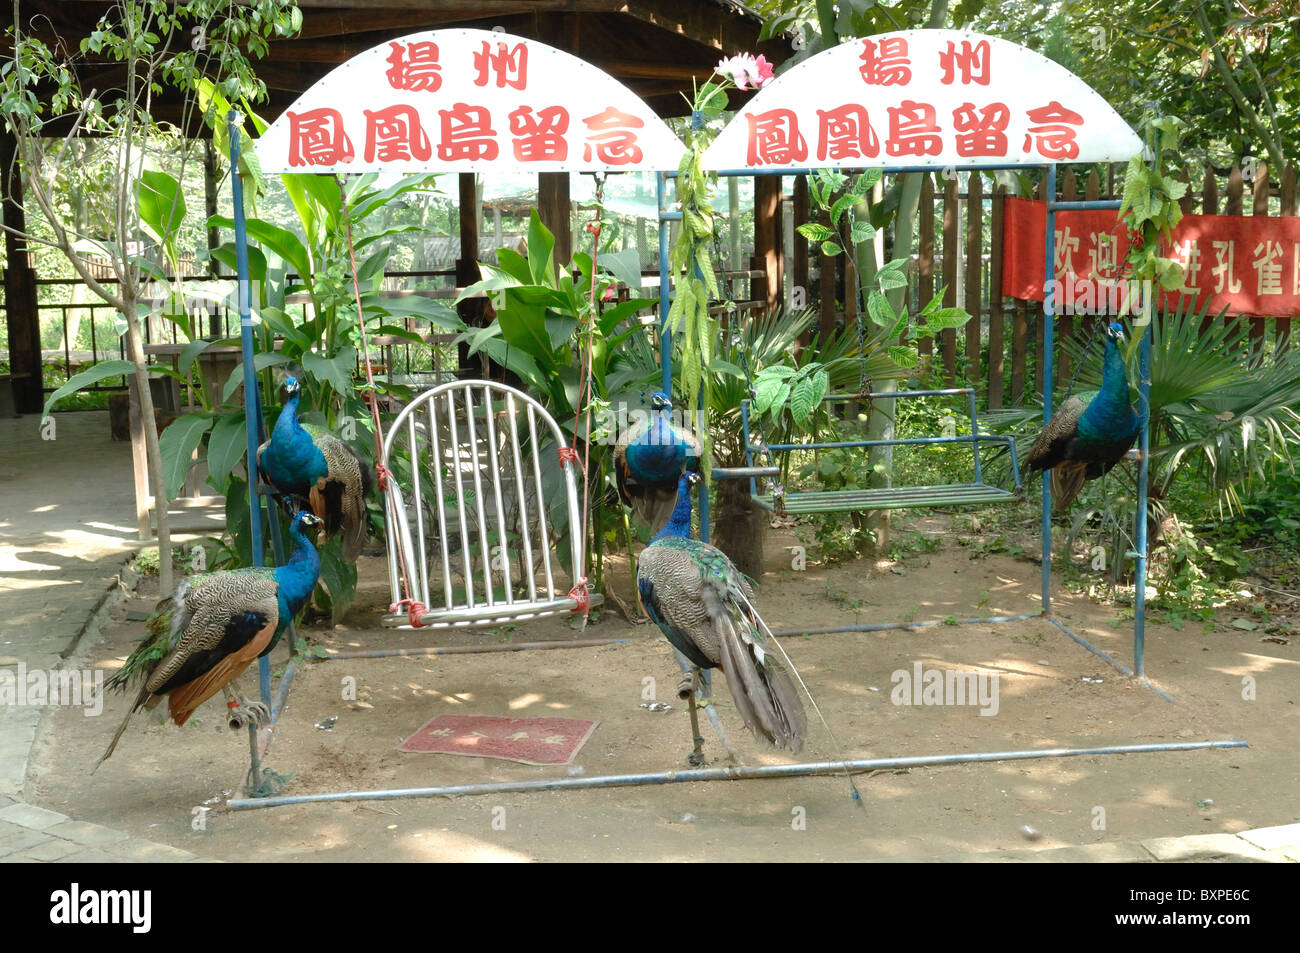 Peacocks at a photo booth in Fairground facilities at Phoenix Garden peoples park Yangzhou China Stock Photo